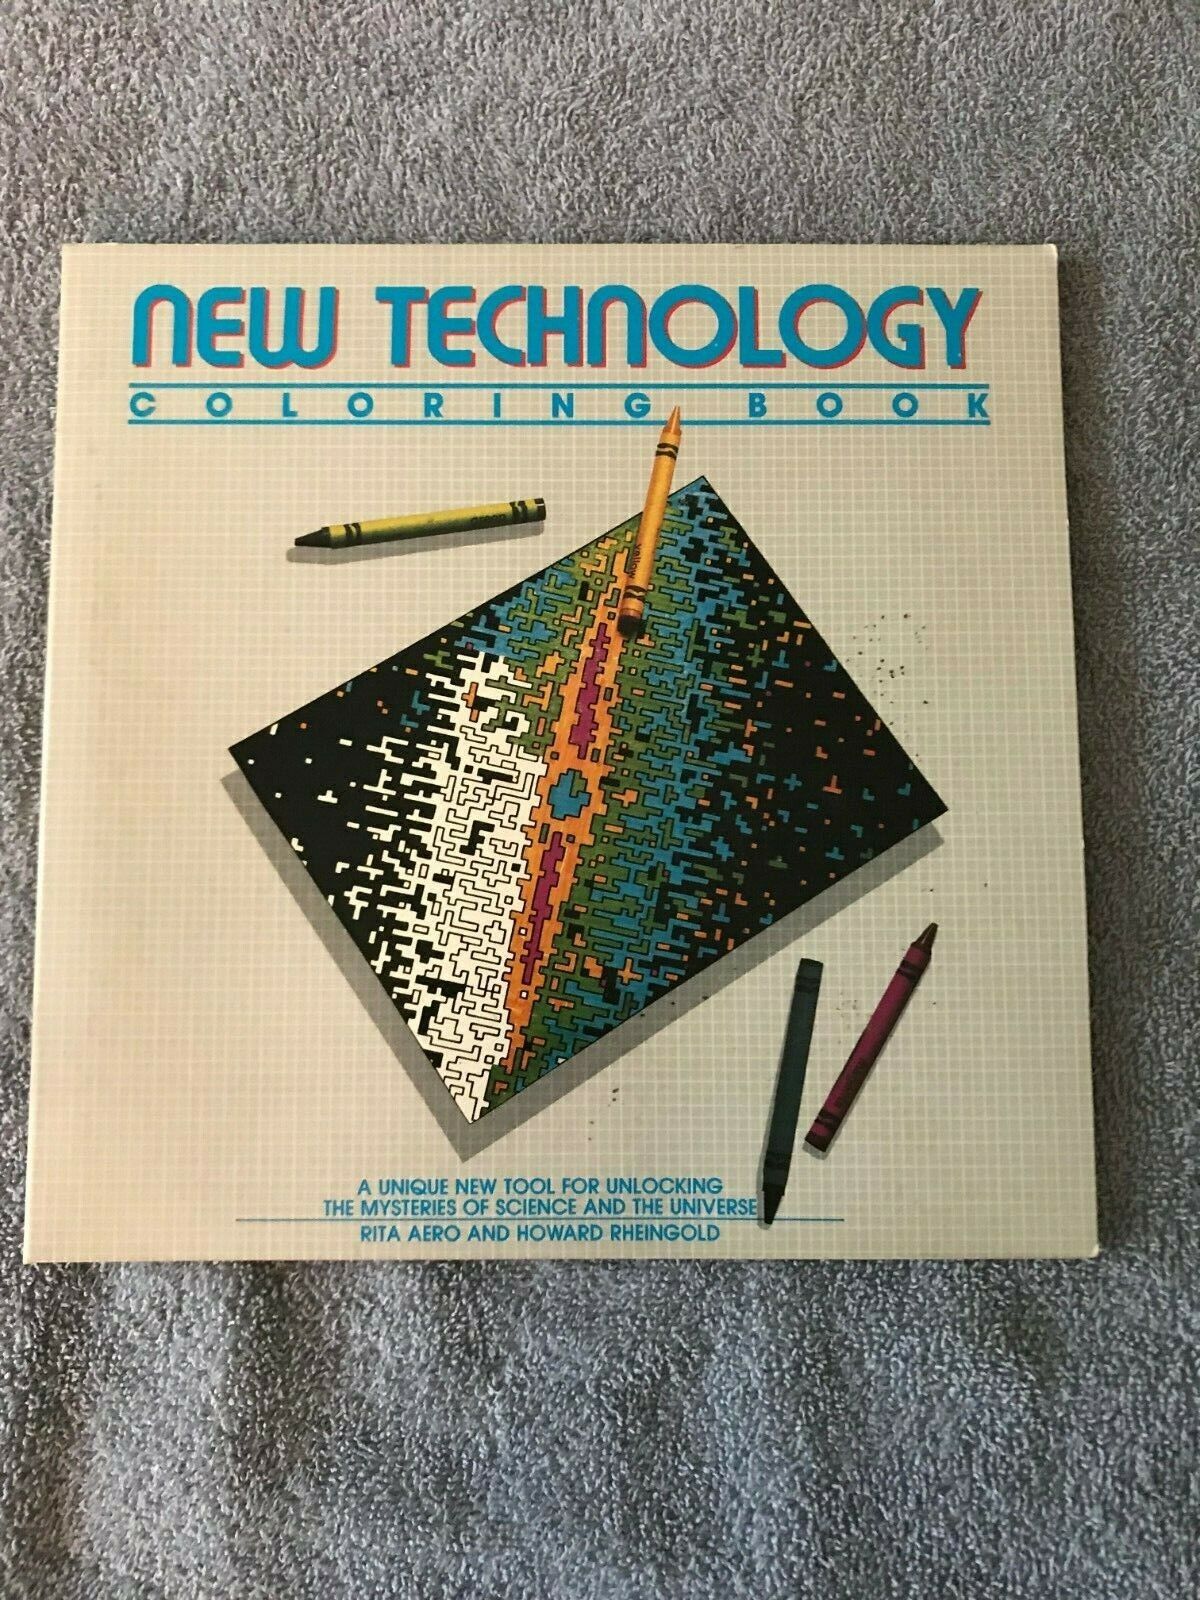 New Technology Coloring Book - The Software Toolworks - Atari ST